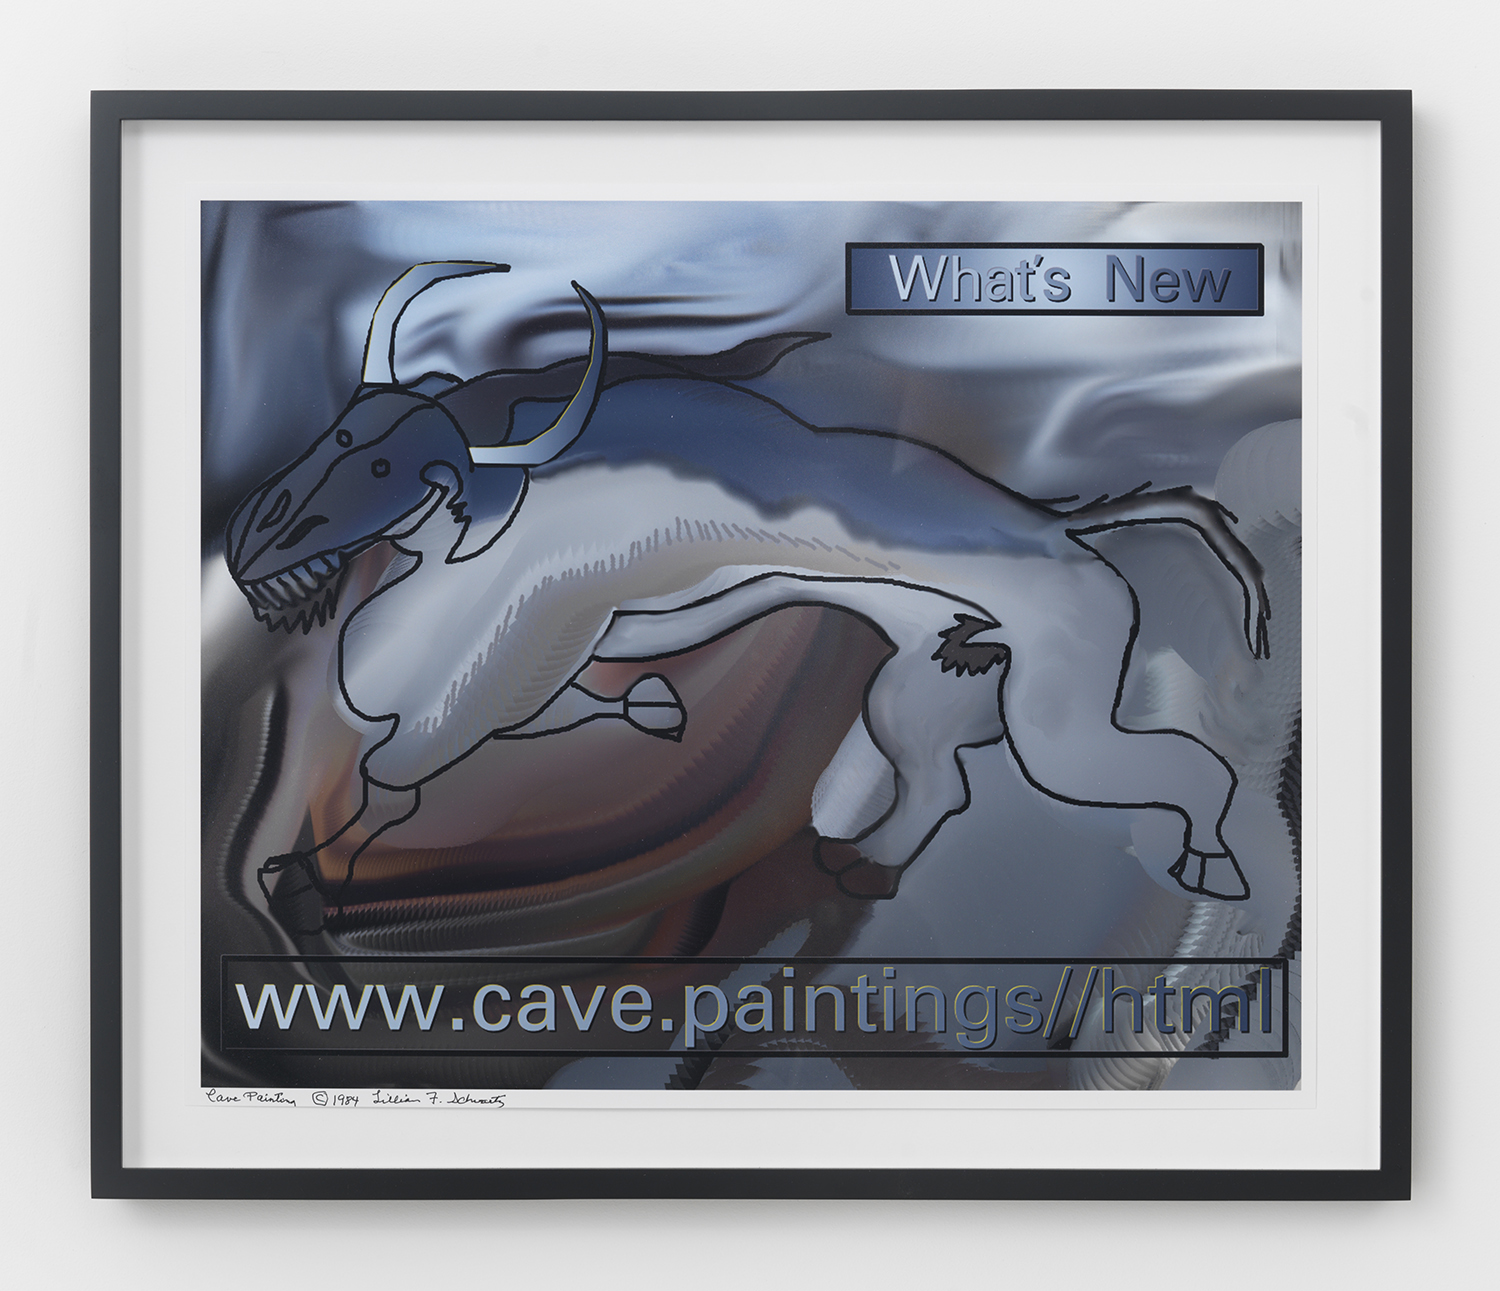 Lillian Schwartz, Cave Painting, 1983-1984, inkjet print of computer graphic, framed: 19.125h x 22.875w in.